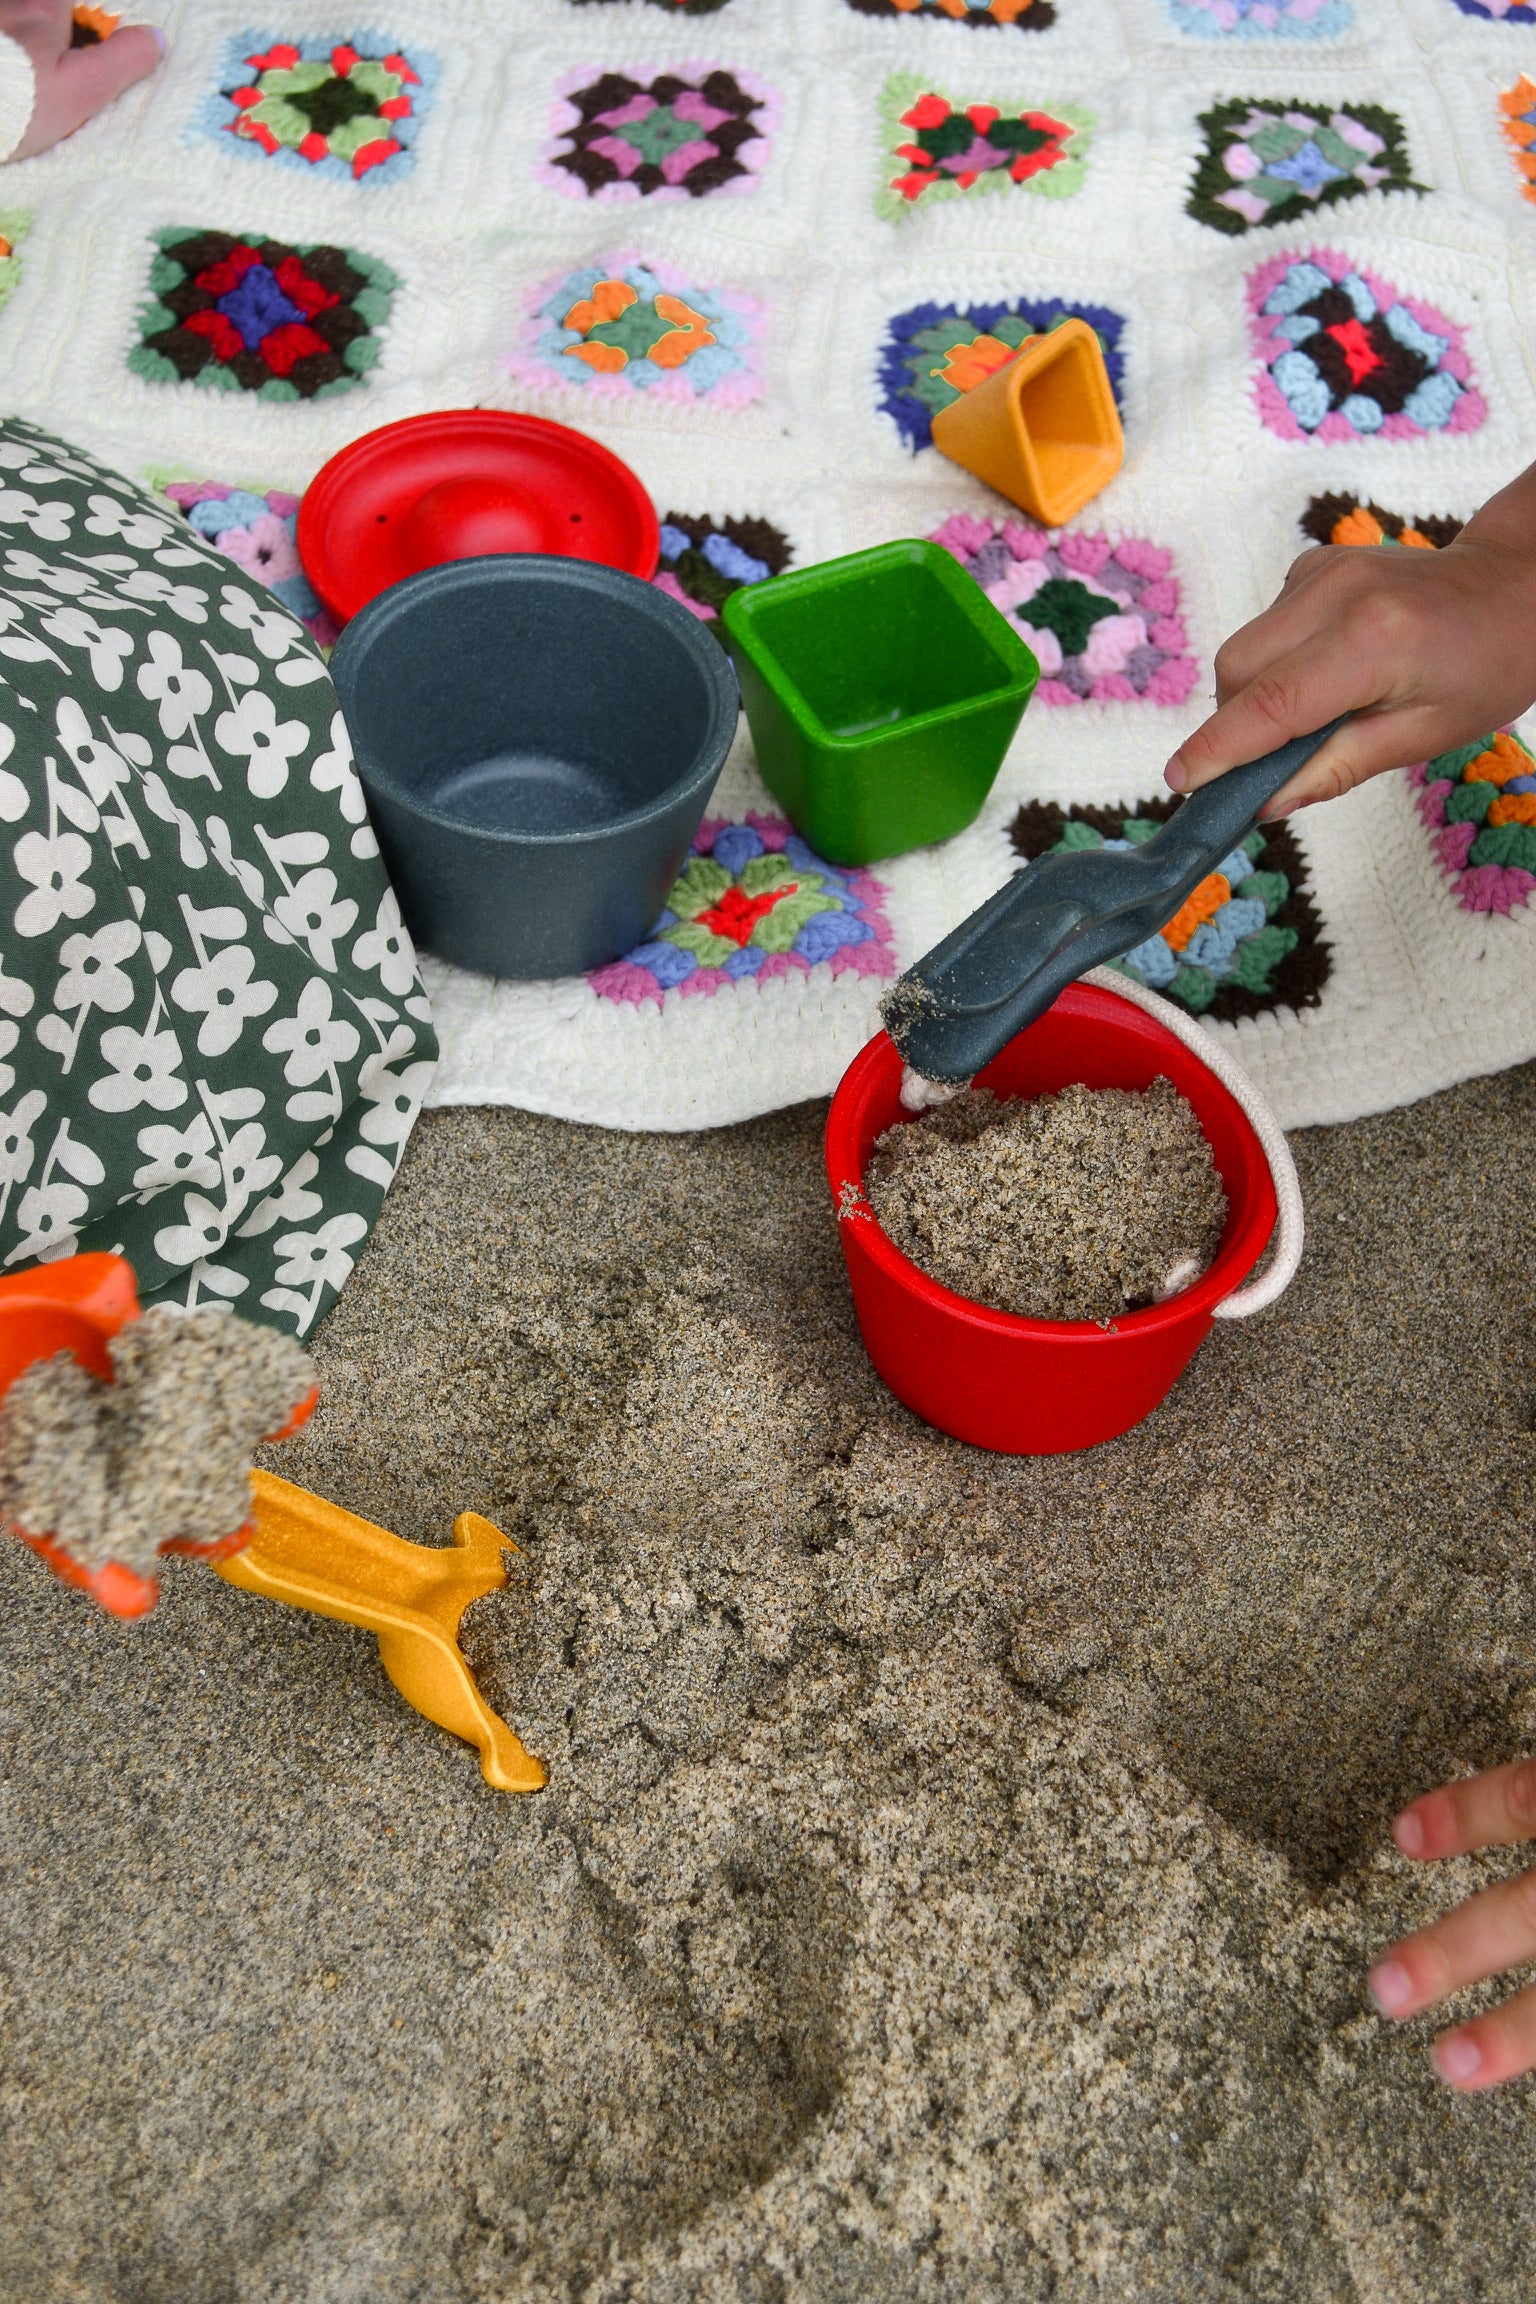 Eco friendly sand toys that are biodegradable in Laguna Beach | Thread Spun Sustainable Shop Blog